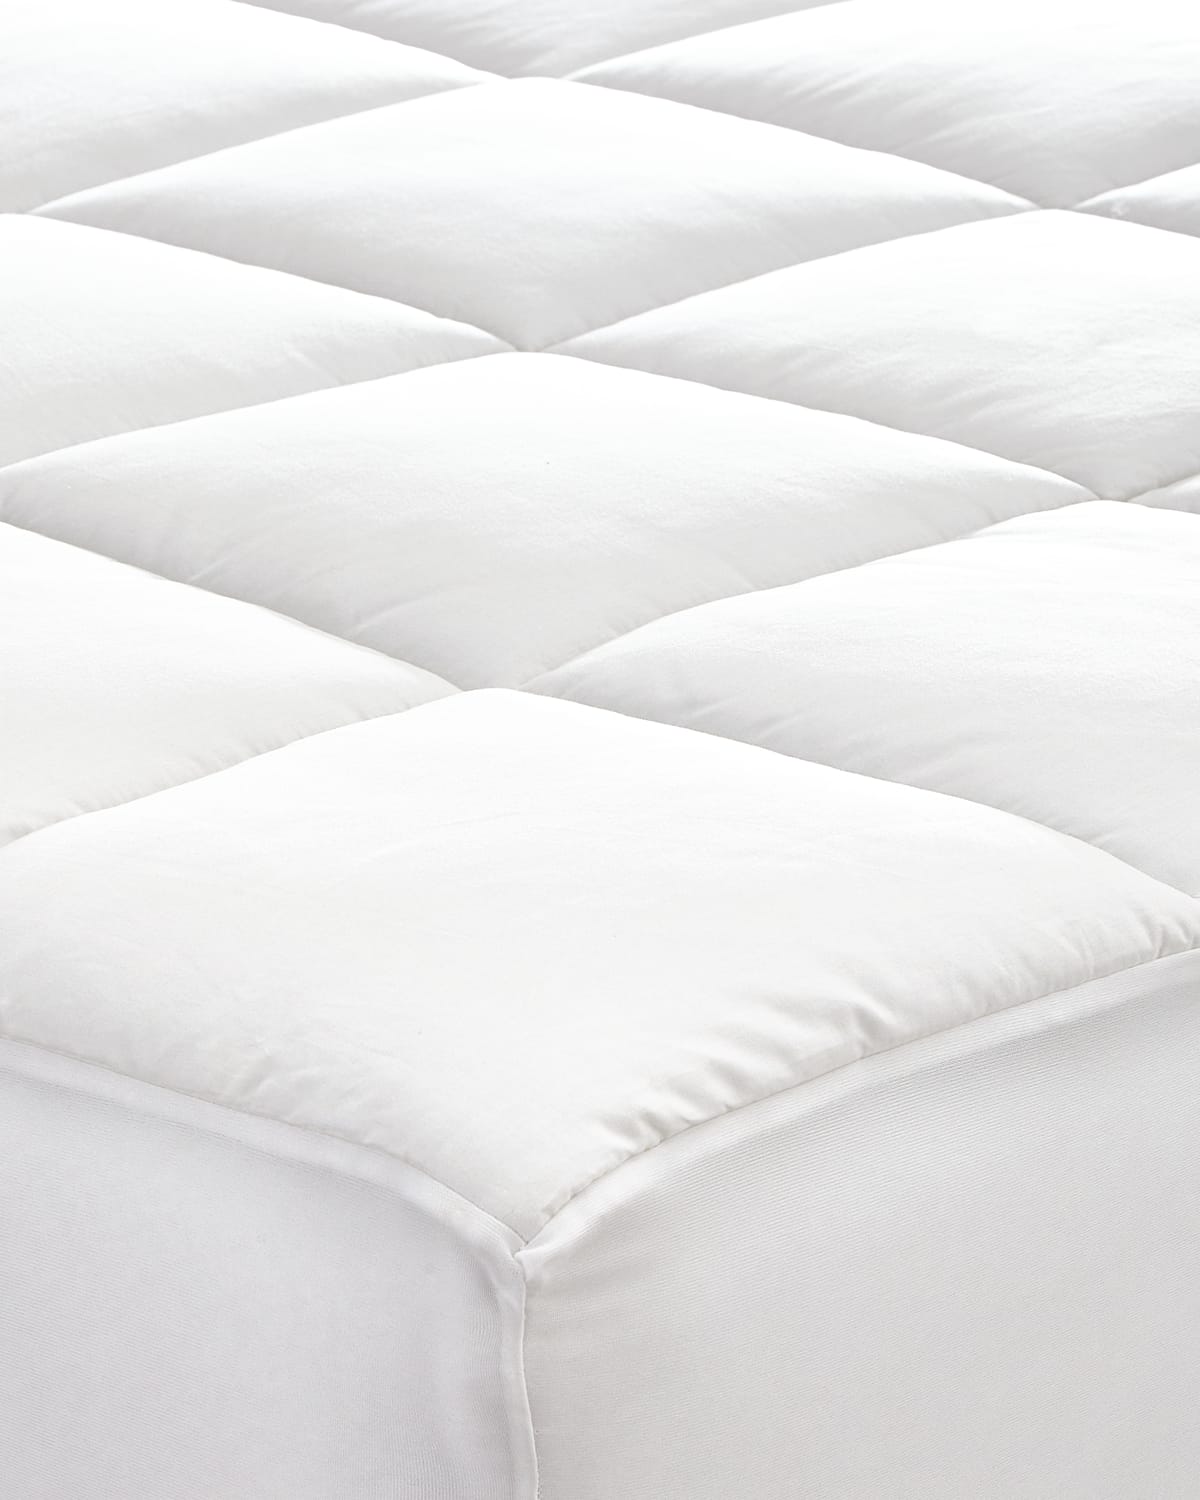 Image Austin Horn Collection Queen Fitted Mattress Pad